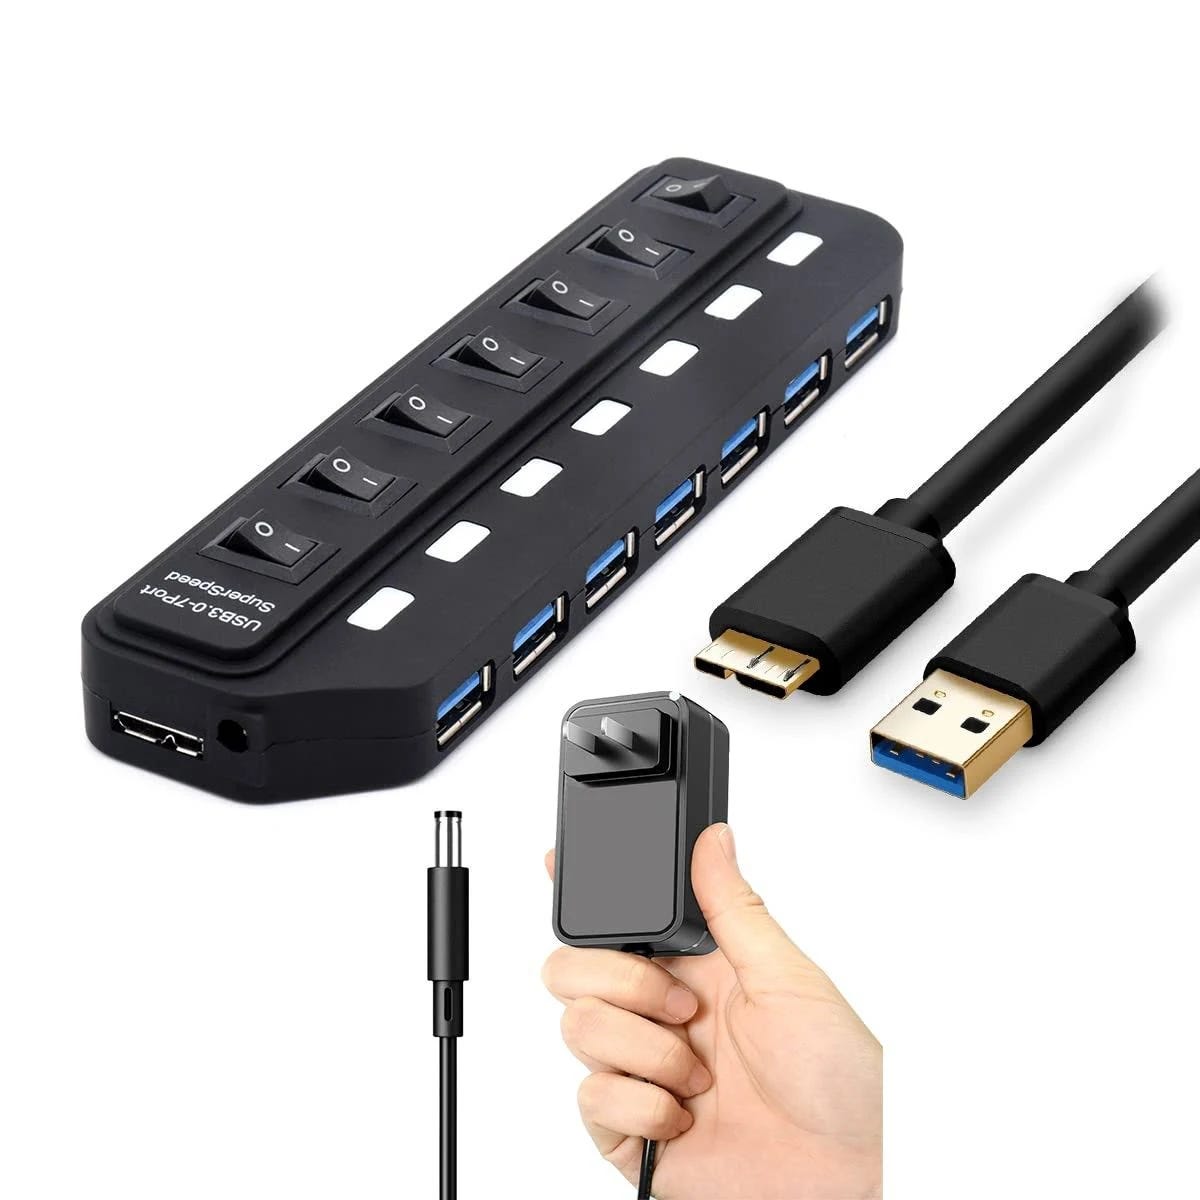 Yey High-Speed USB Hub with 7 Ports and 5V2A External Power Supply | Image